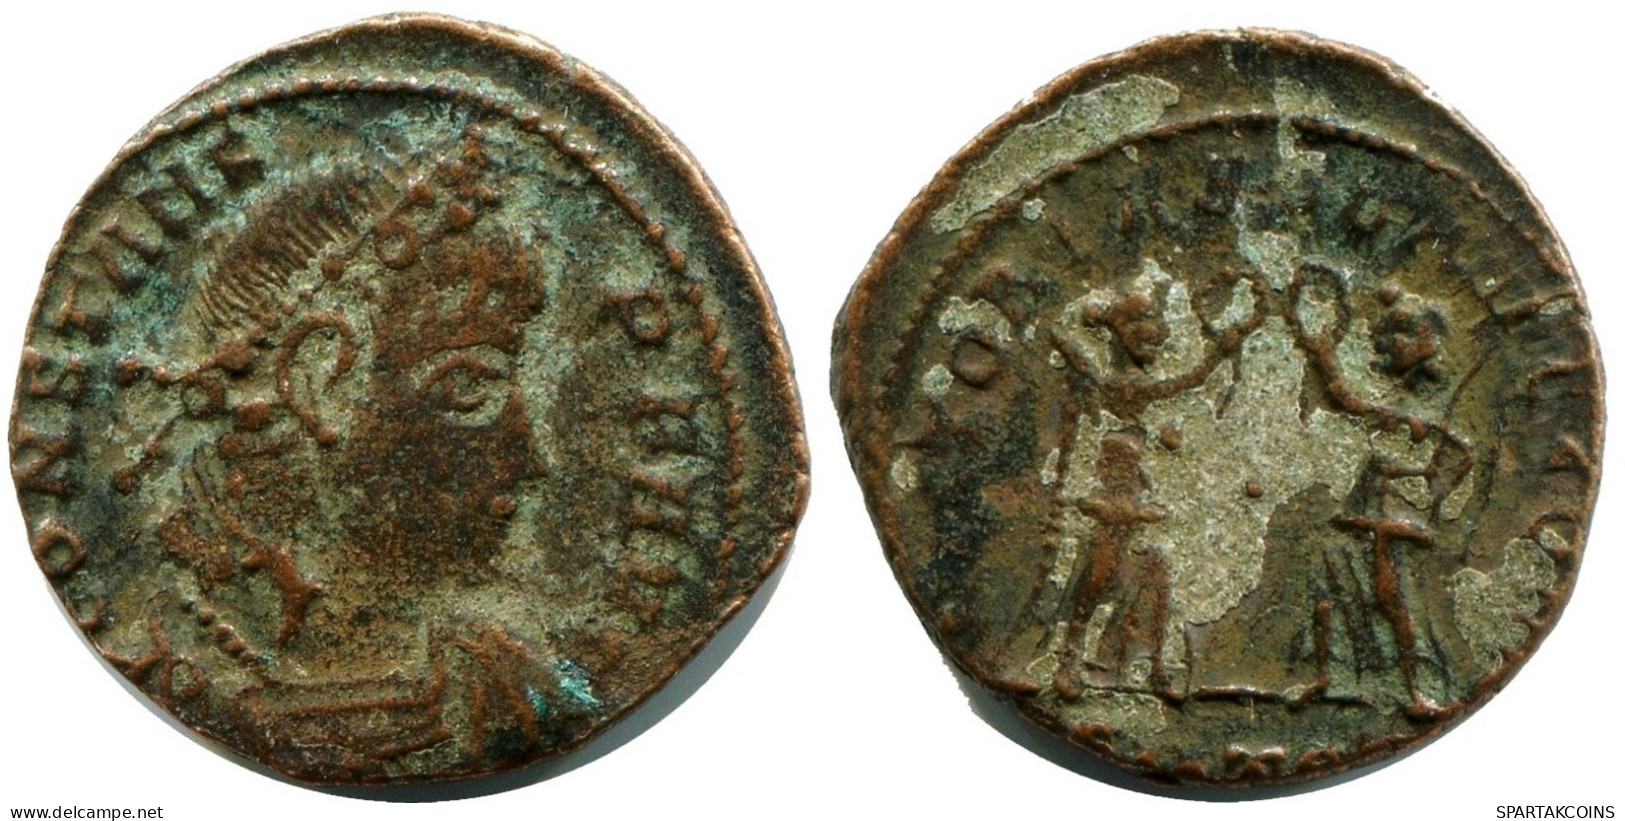 CONSTANS MINTED IN THESSALONICA FROM THE ROYAL ONTARIO MUSEUM #ANC11881.14.D.A - Der Christlischen Kaiser (307 / 363)